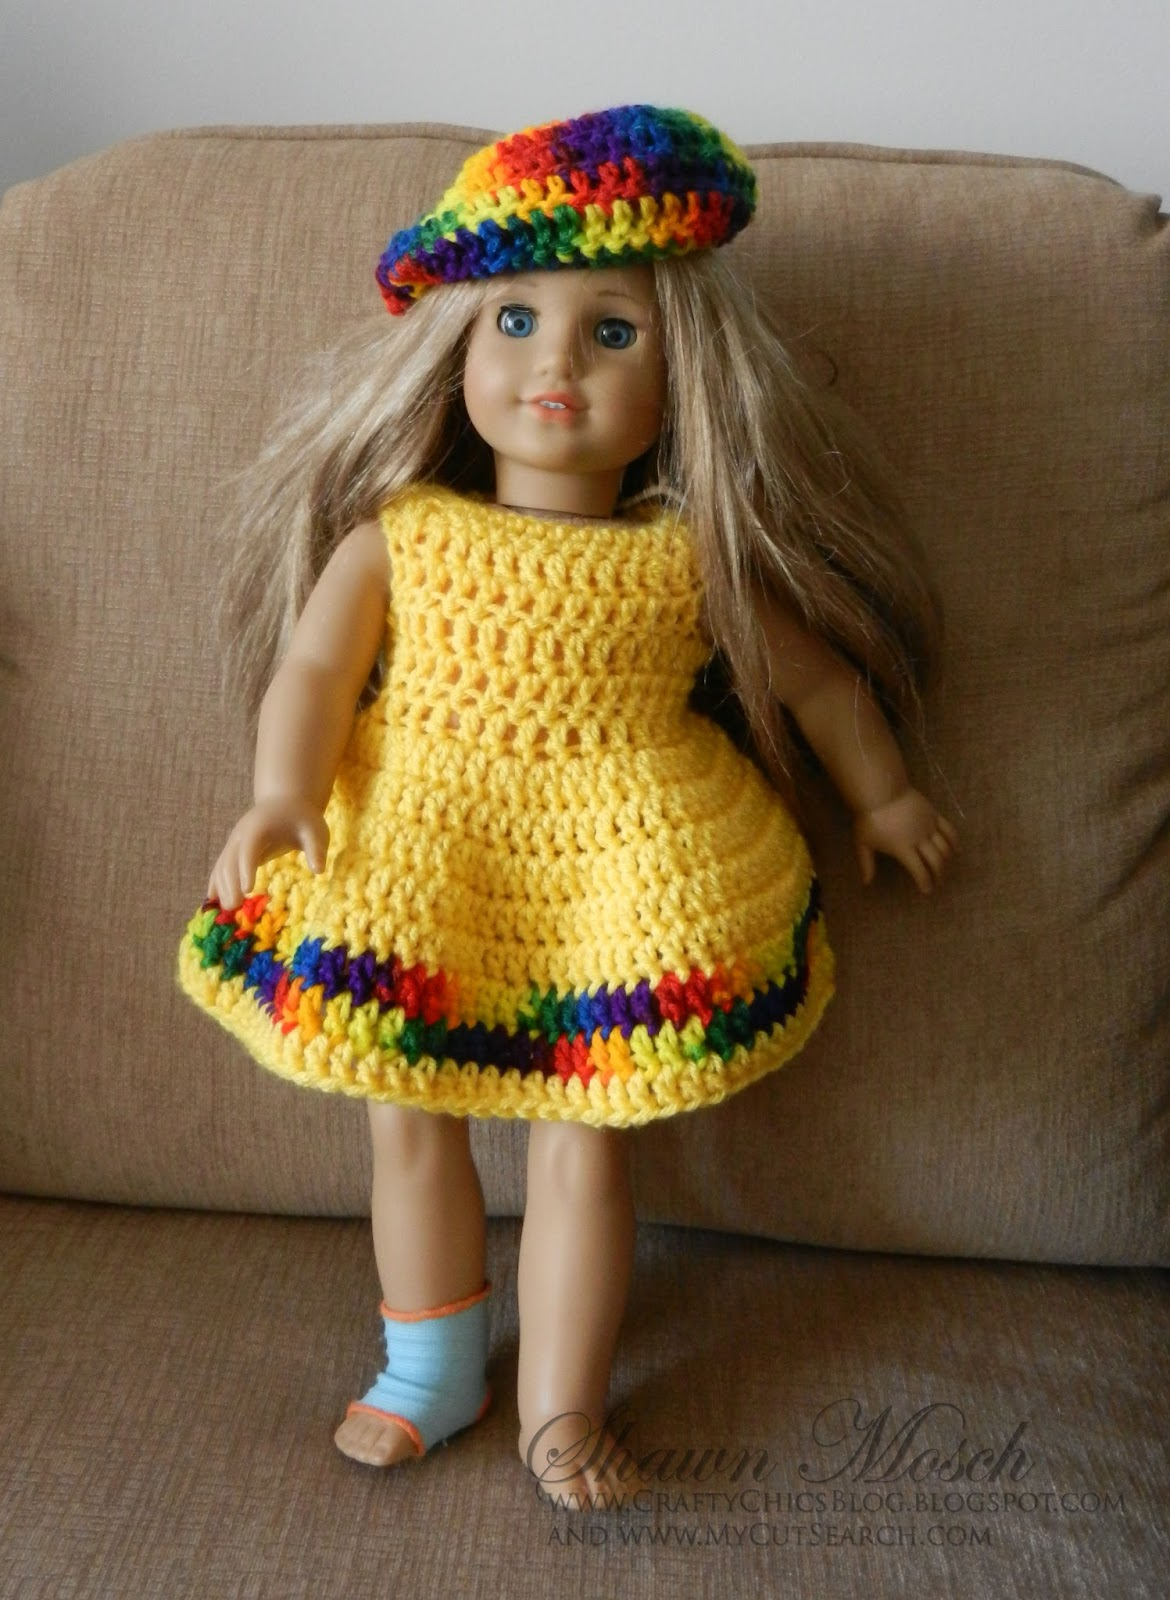 Crochet Doll Clothes Patterns Crafty Chics American Girl Doll Dress